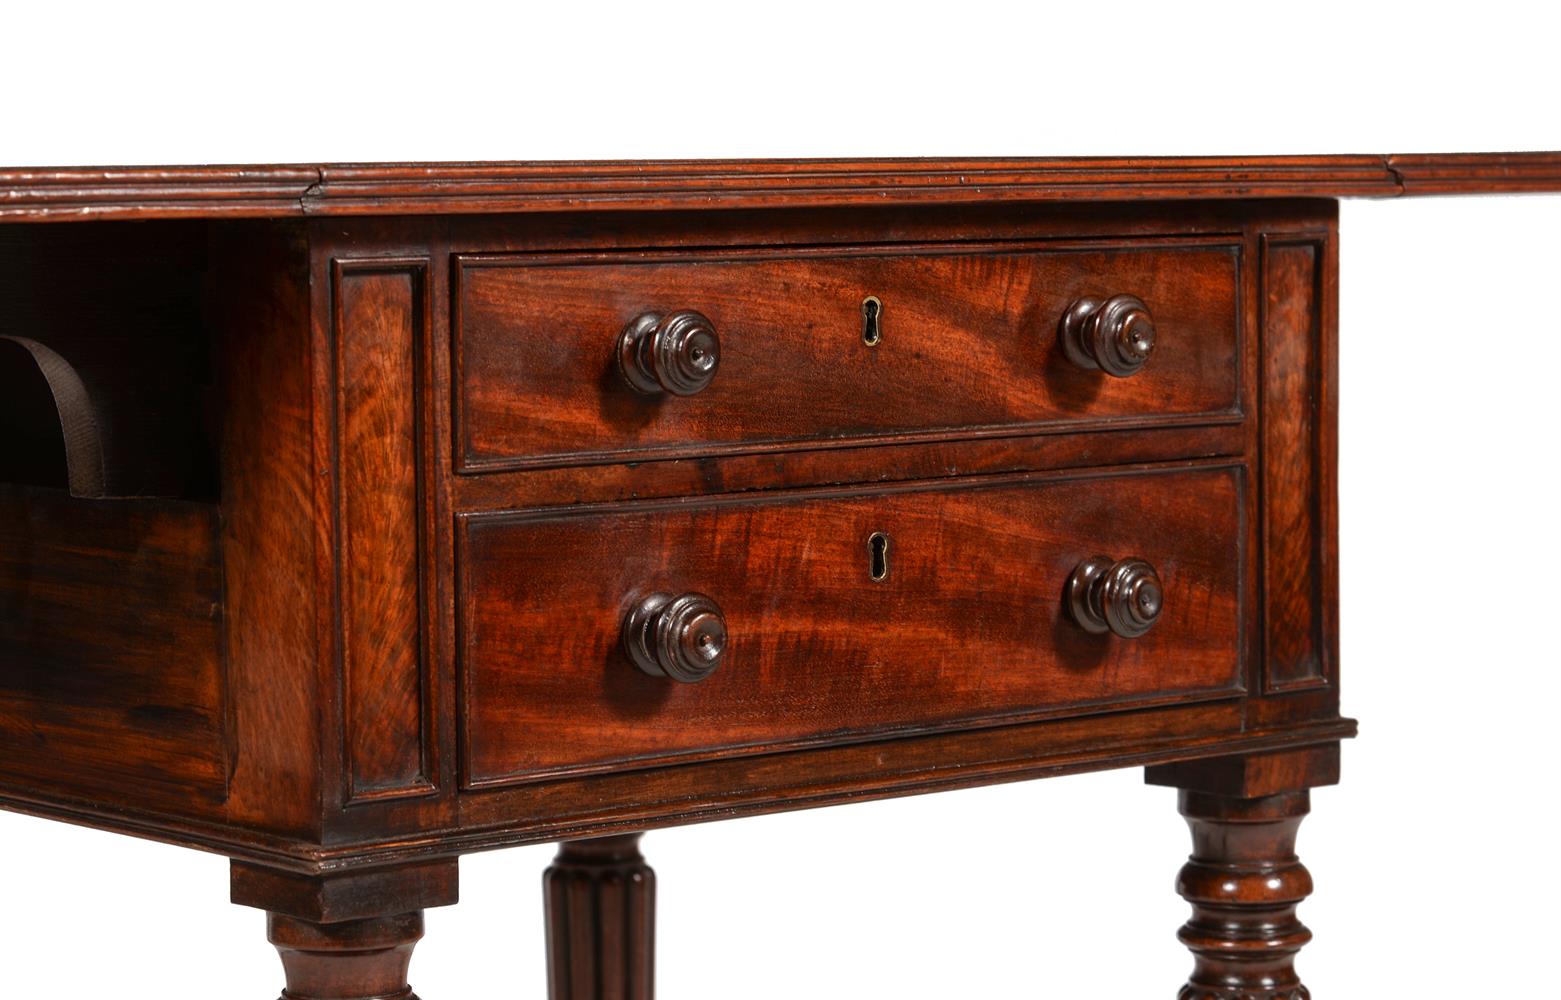 A GEORGE IV MAHOGANY PEMBROKE TABLE, IN THE MANNER OF GILLOWS, CIRCA 1830 - Image 4 of 5